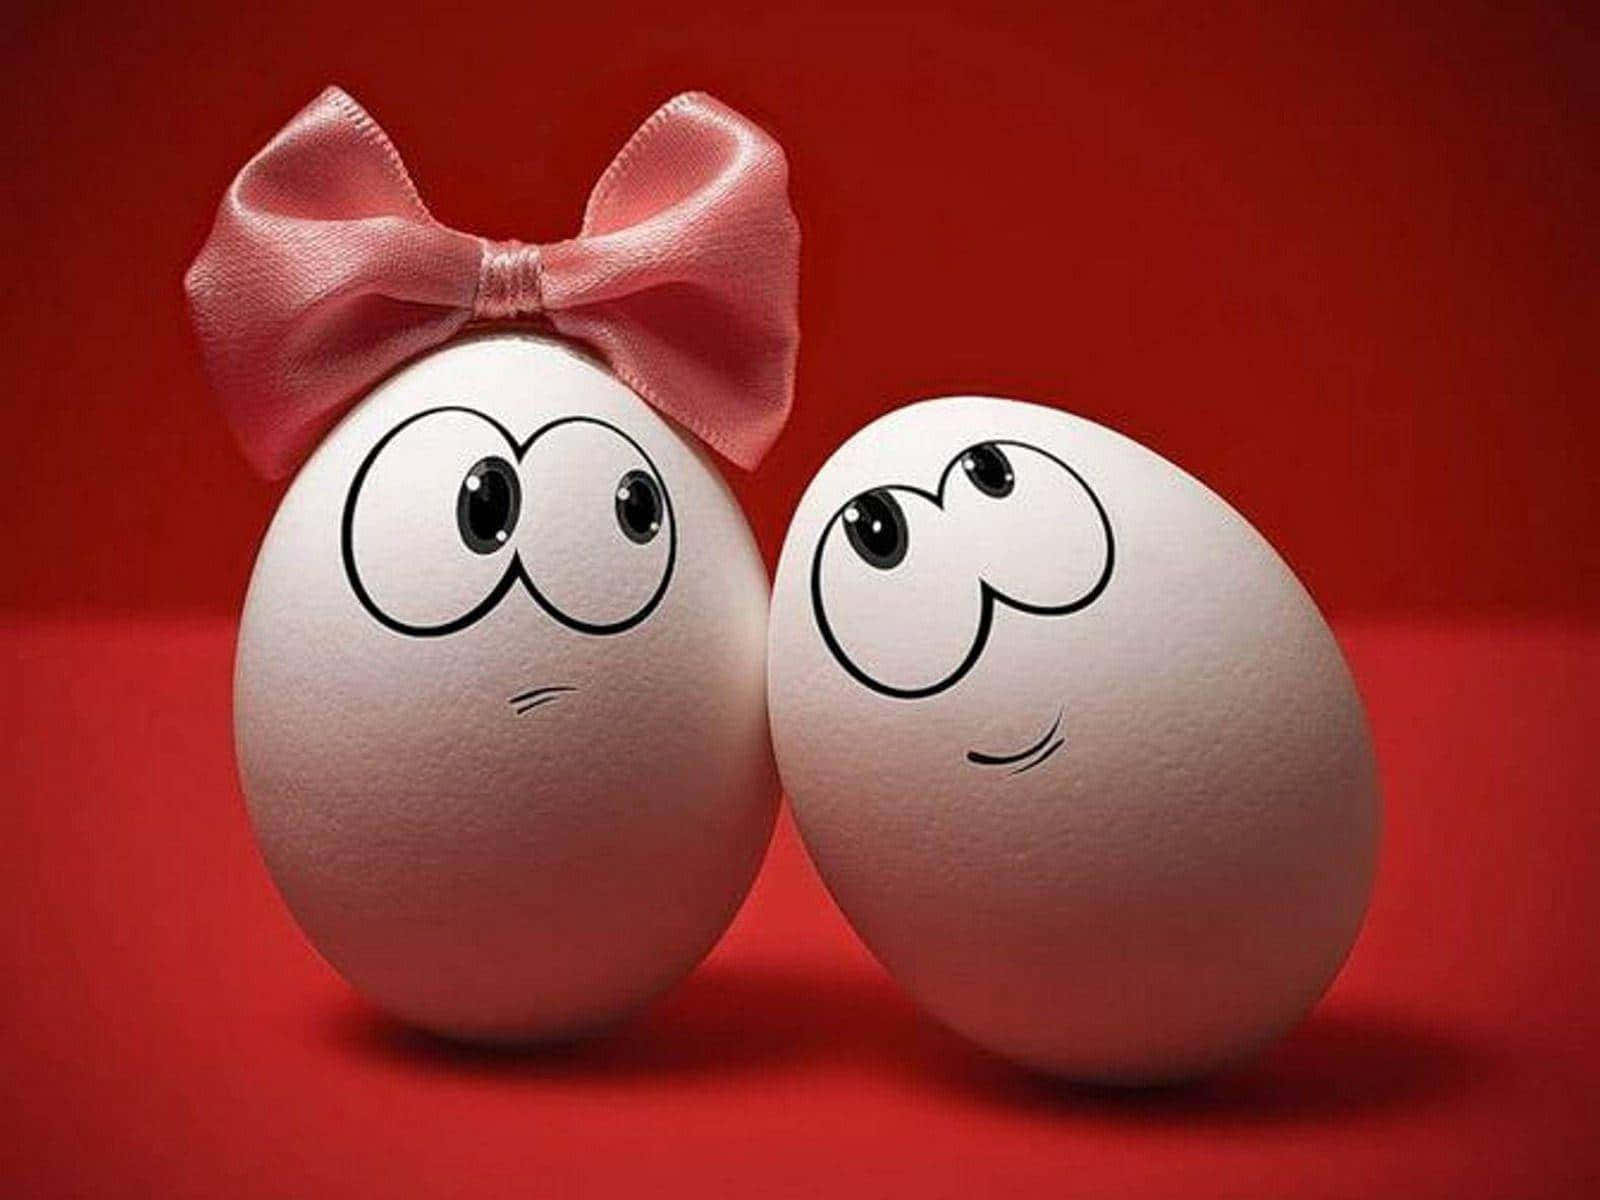 Two Eggs With A Bow On Them Wallpaper